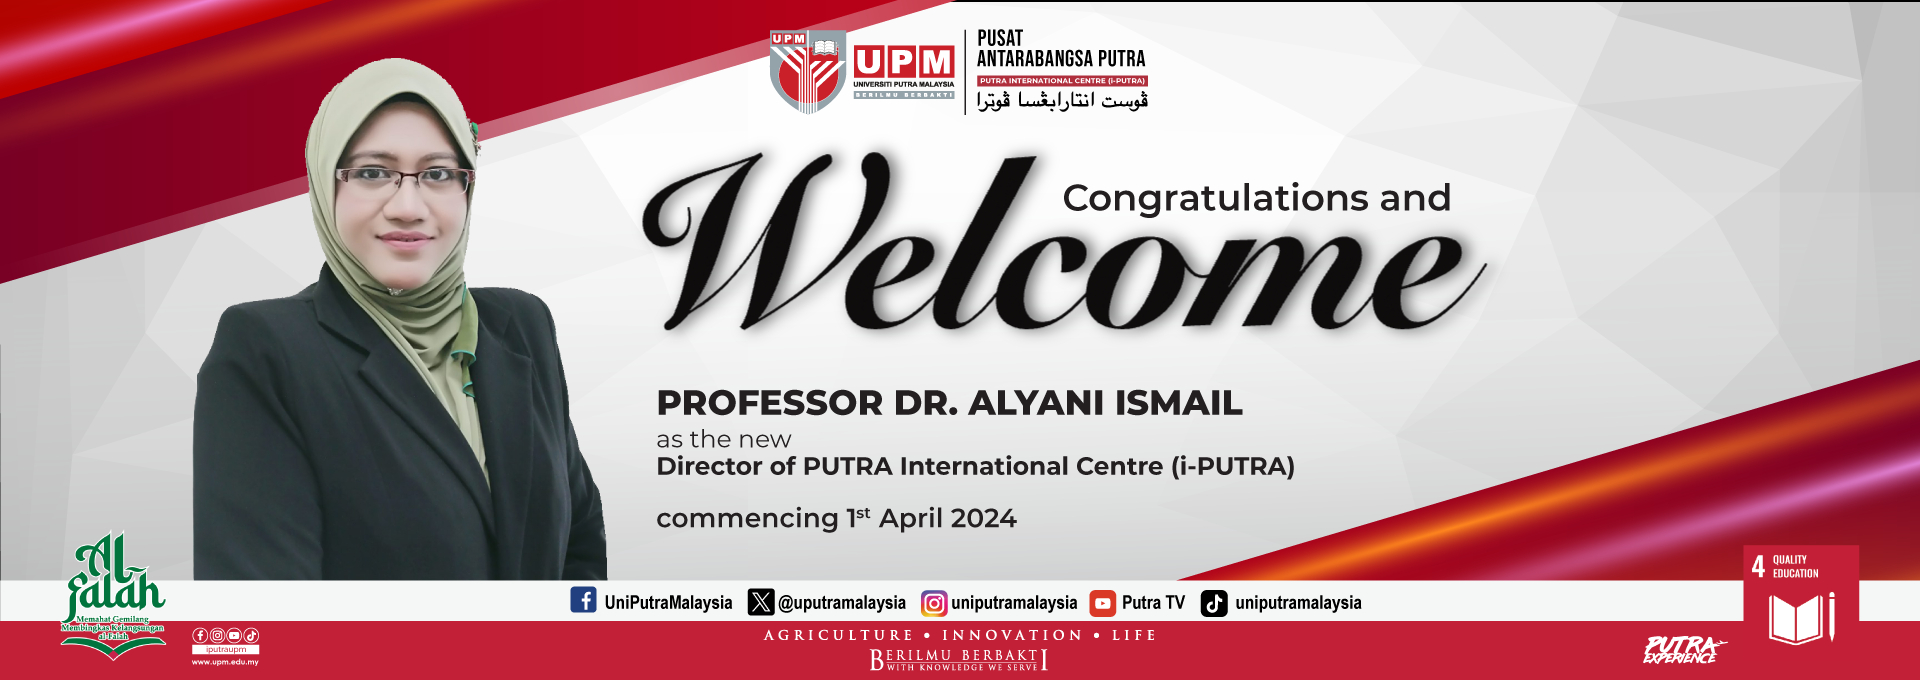 Welcome to i-PUTRA Prof. Dr. Alyani Ismail